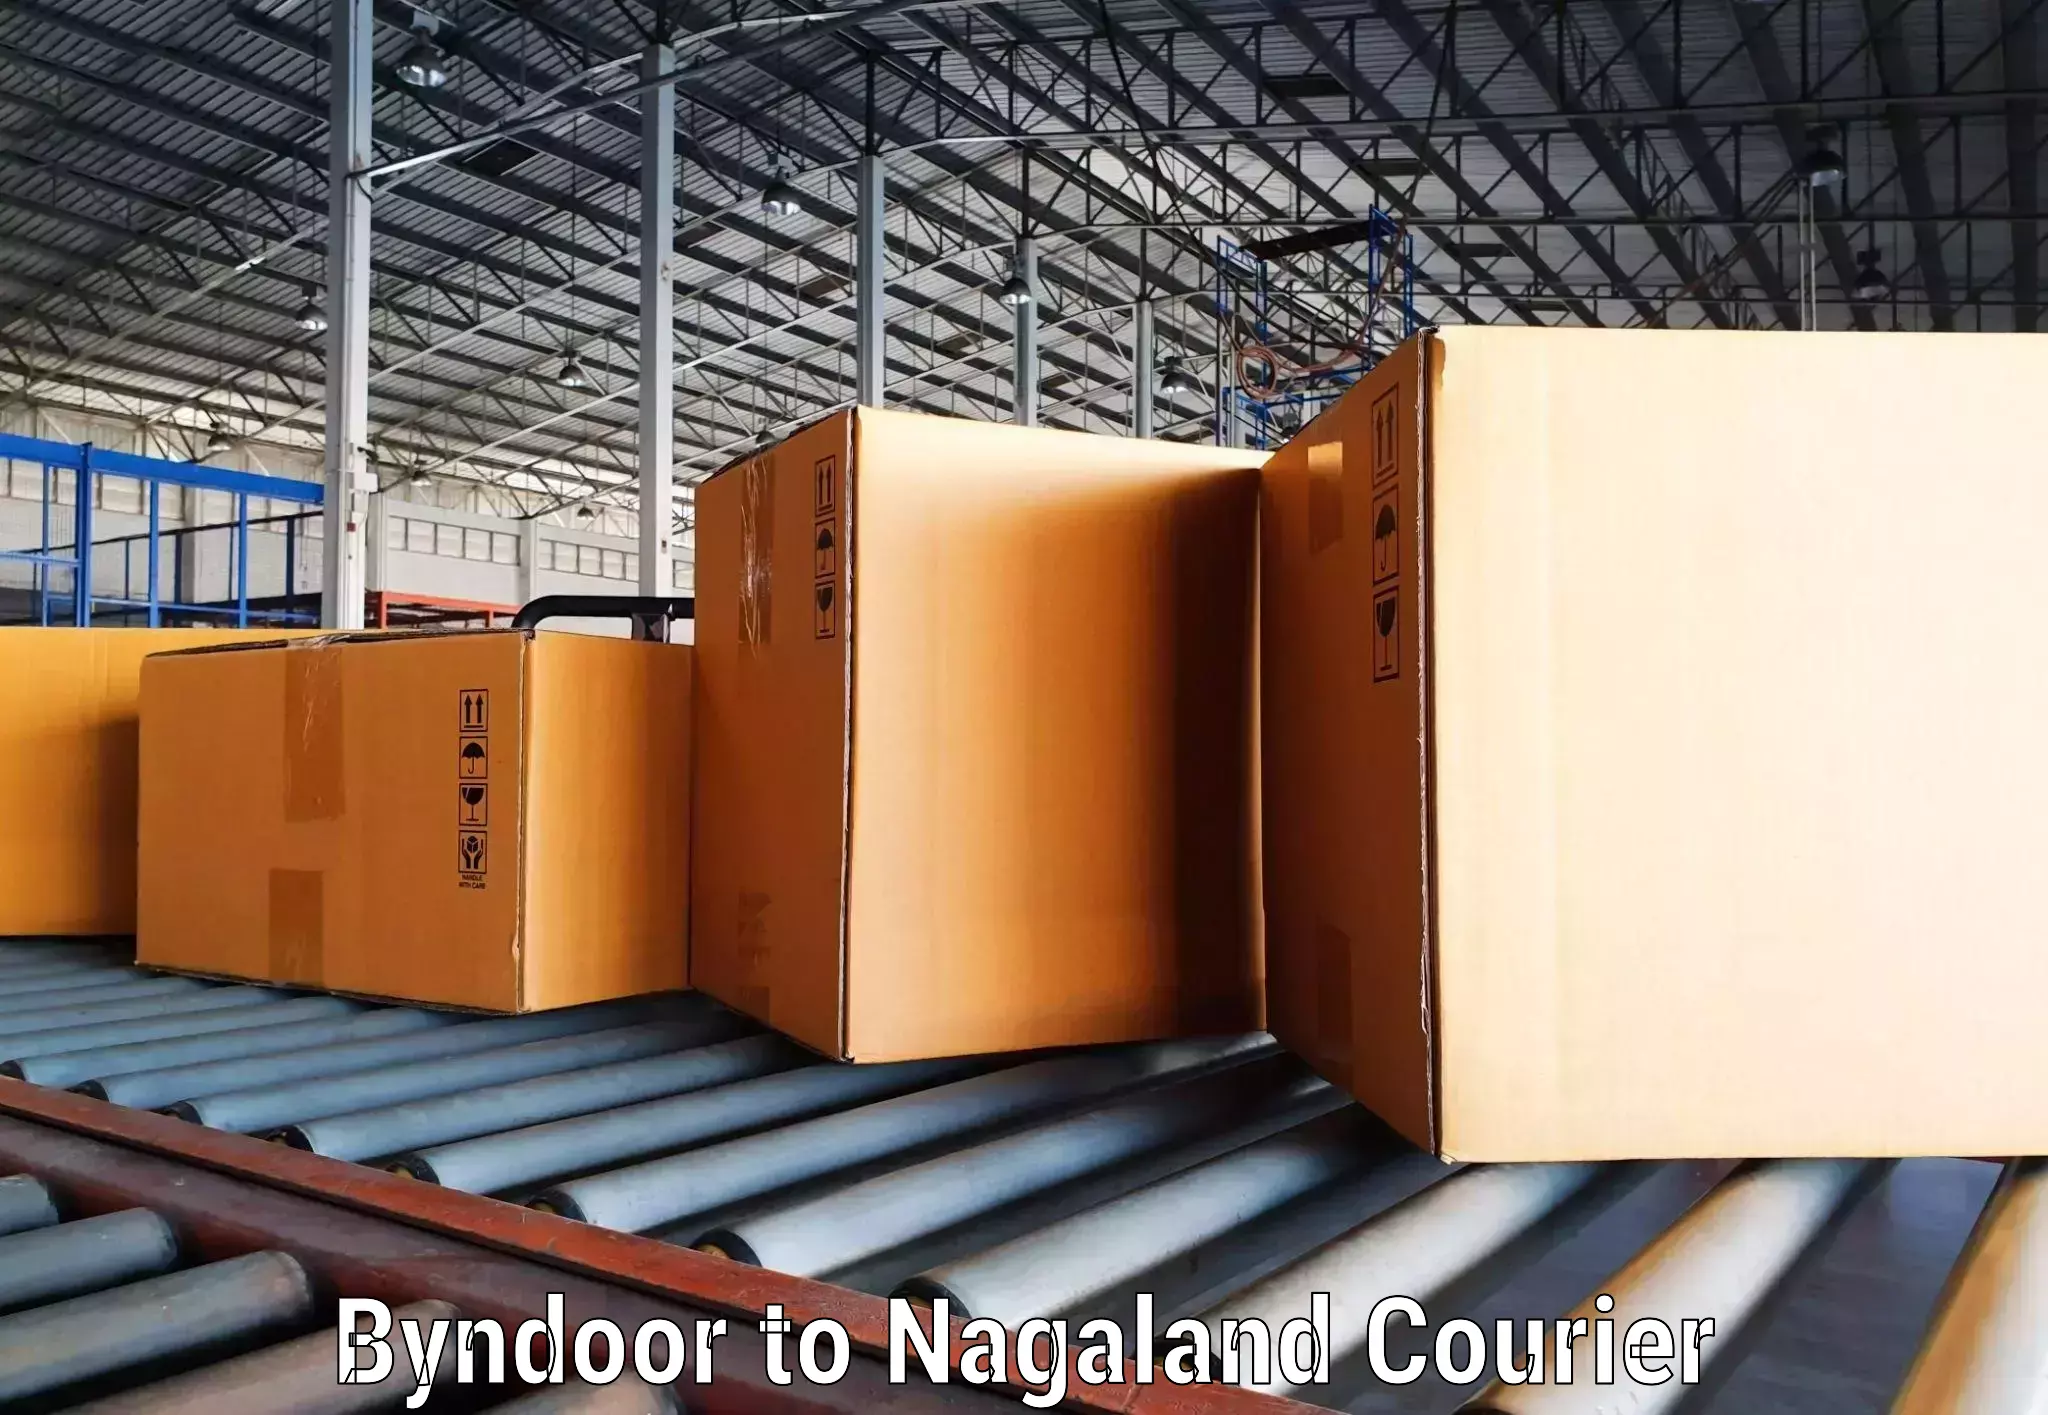 Nationwide courier service Byndoor to Mon